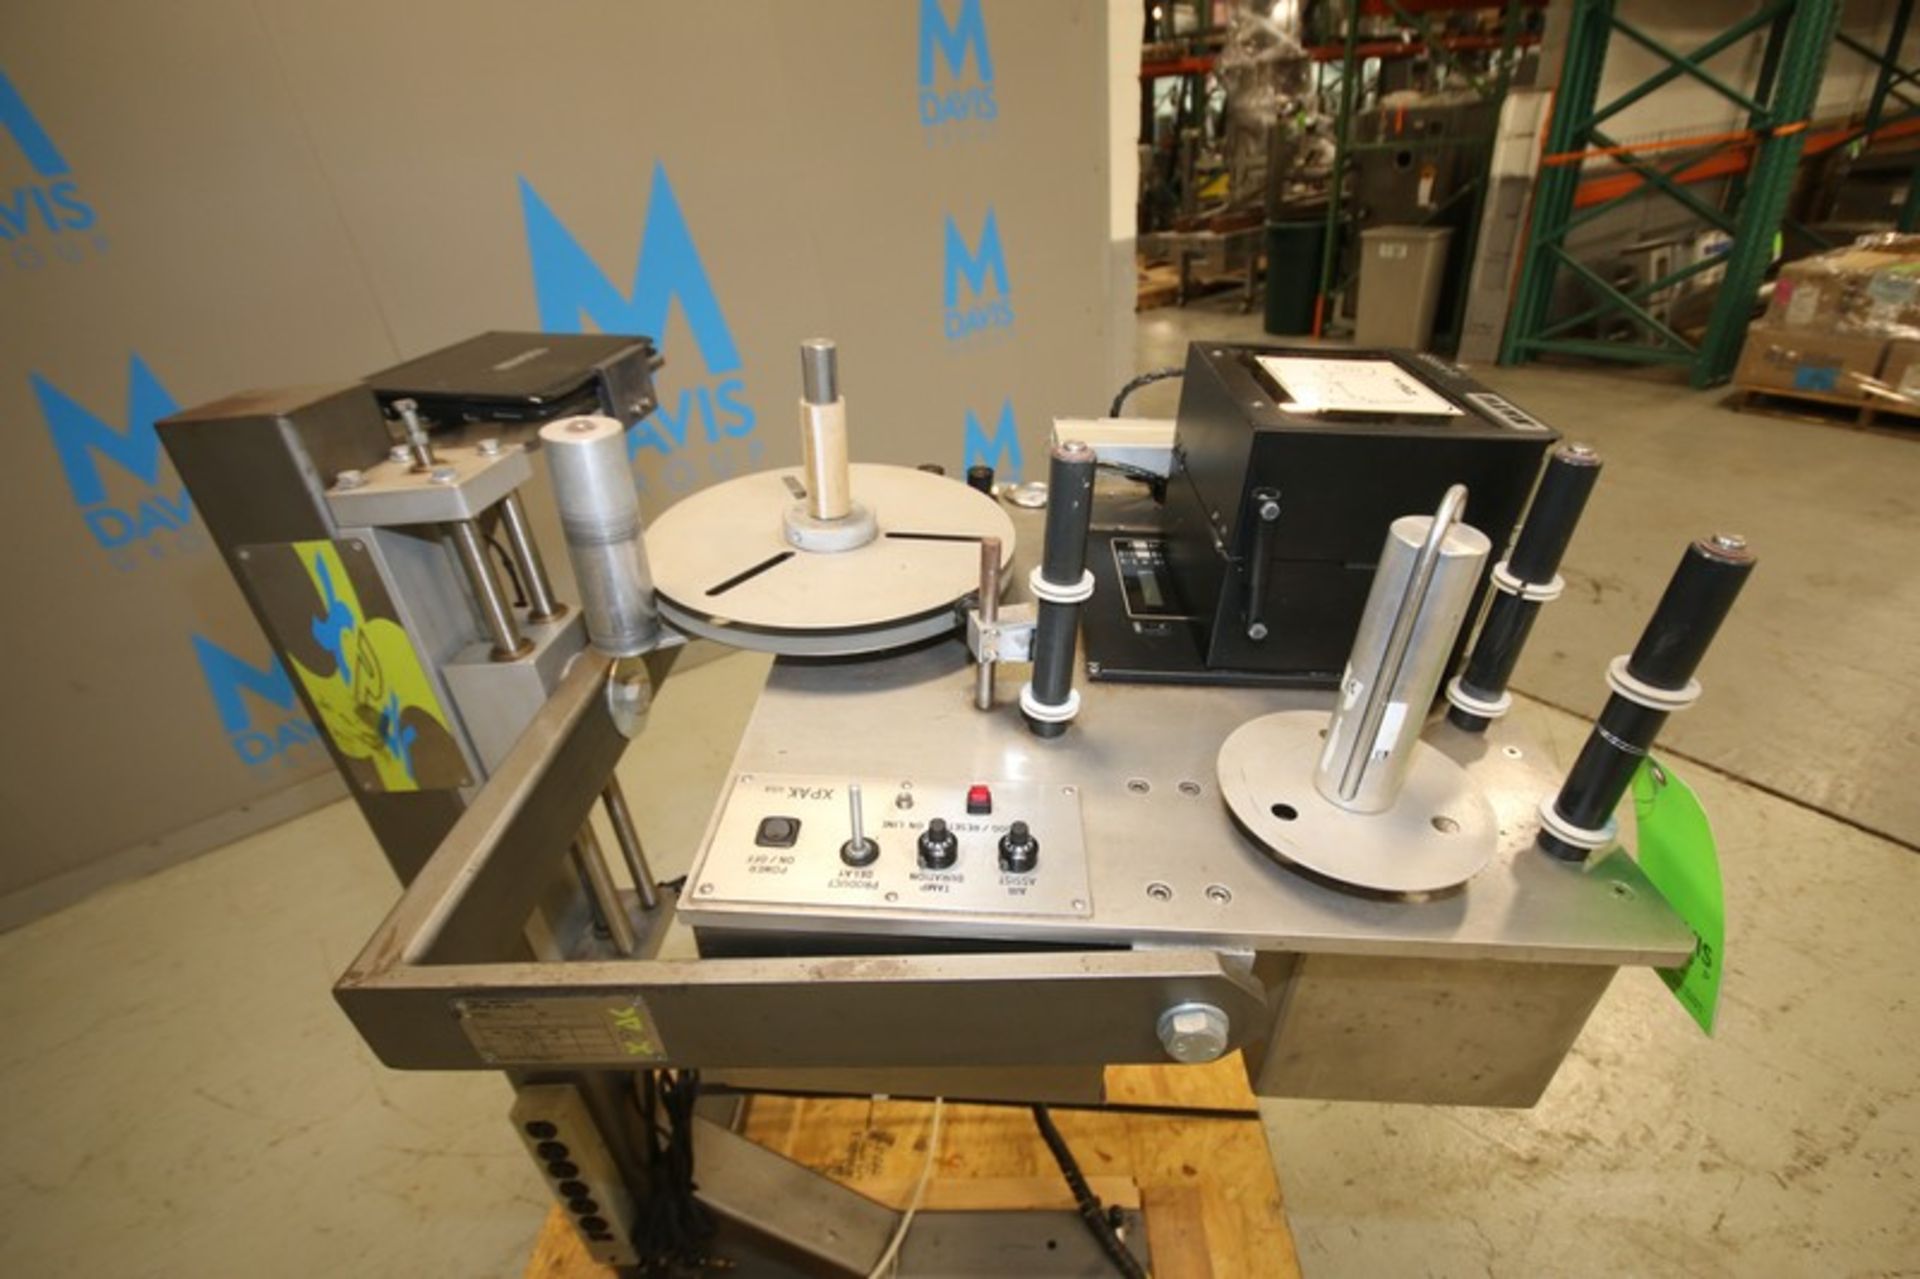 XPak Roll Fed Labeler, Model XP-A8200, SN SX052010, 115V, Mounted on Stand with Top Mounted Sato M- - Image 2 of 8